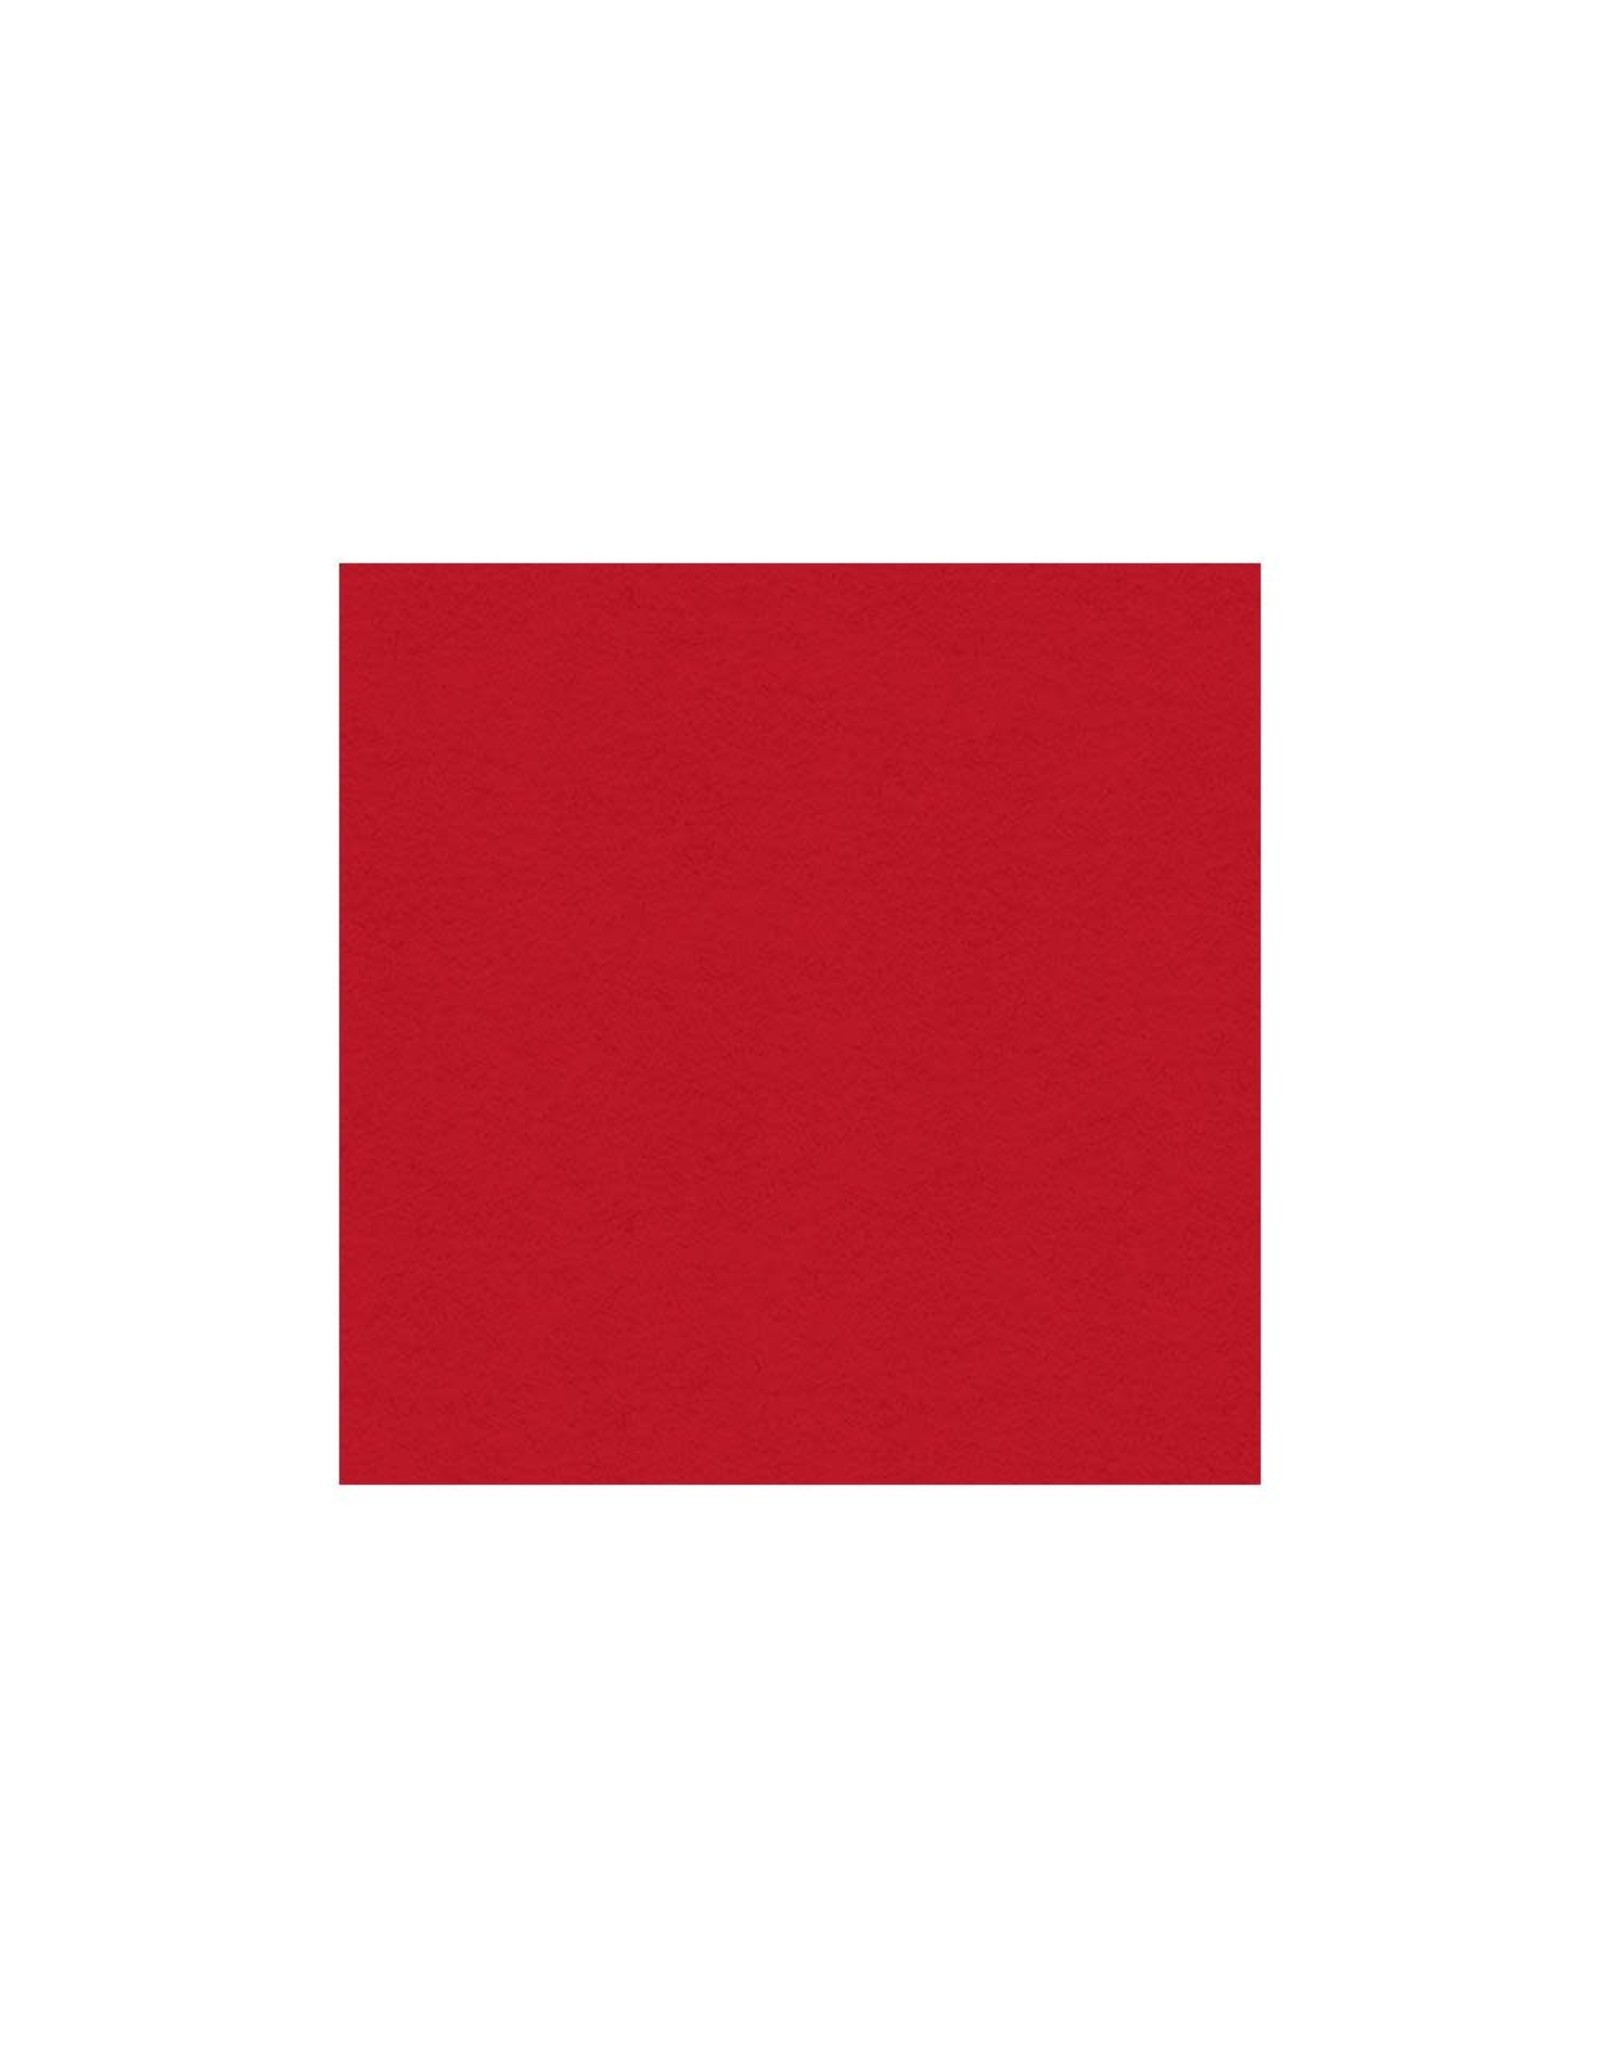 MY COLORS MY COLORS CLASSIC 80 LB COVER WEIGHT SCARLET 12x12 CARDSTOCK